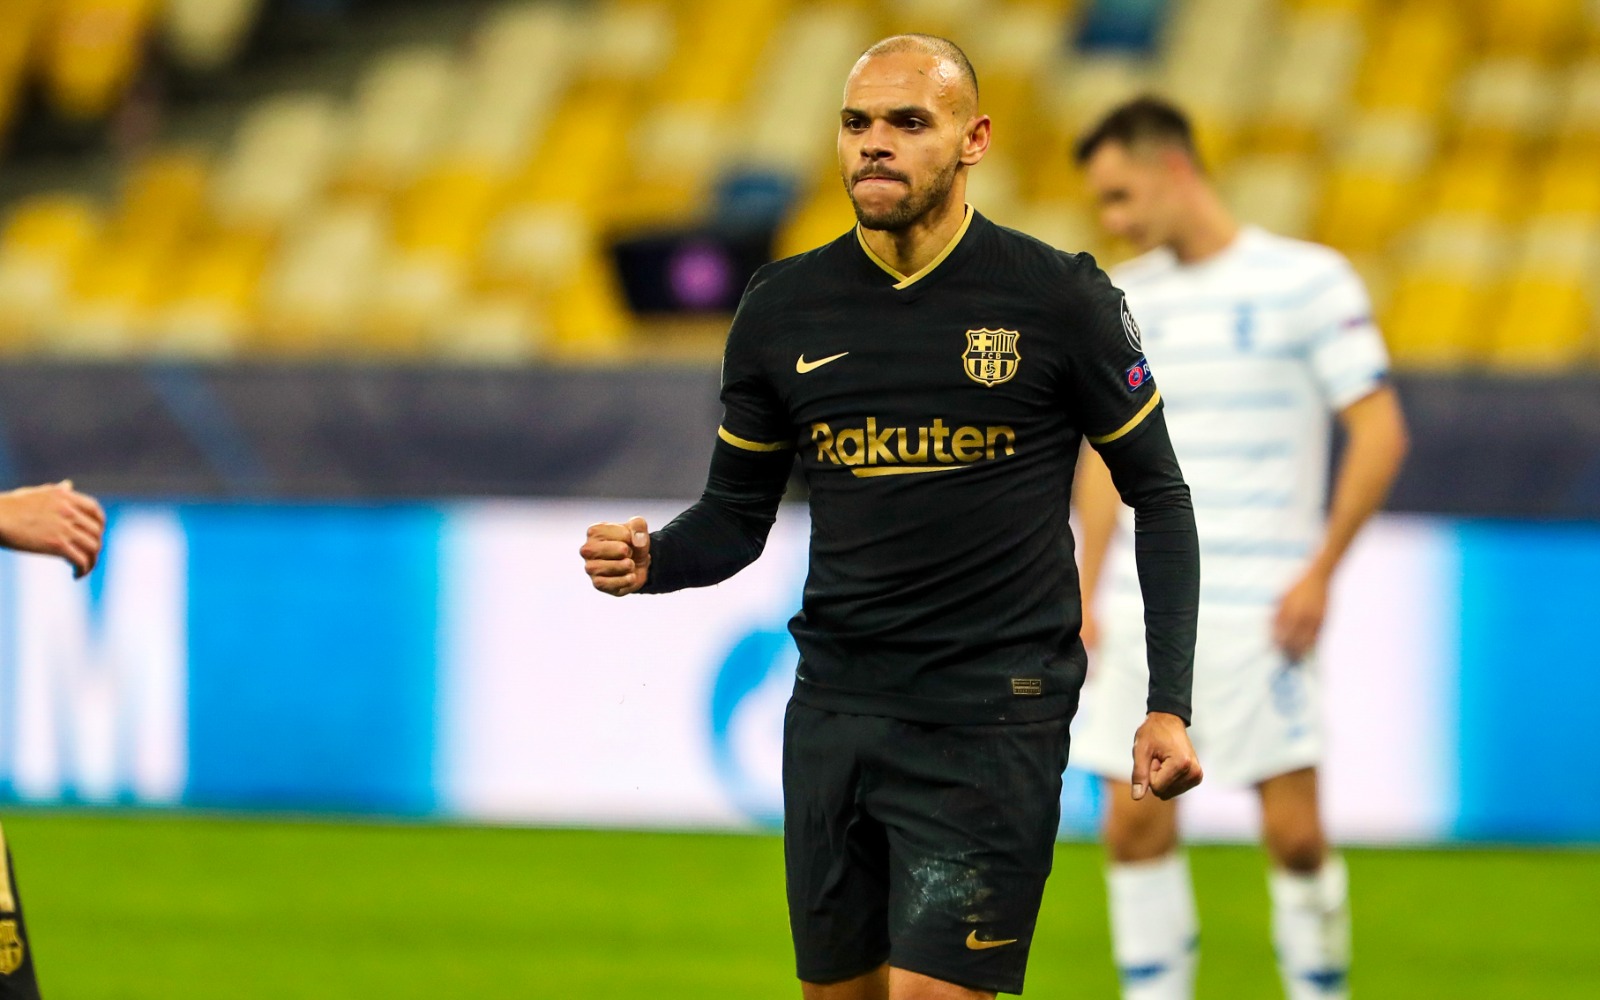 Martin Braithwaite is the second-richest player at Barcelona after Lionel Messi - Football España